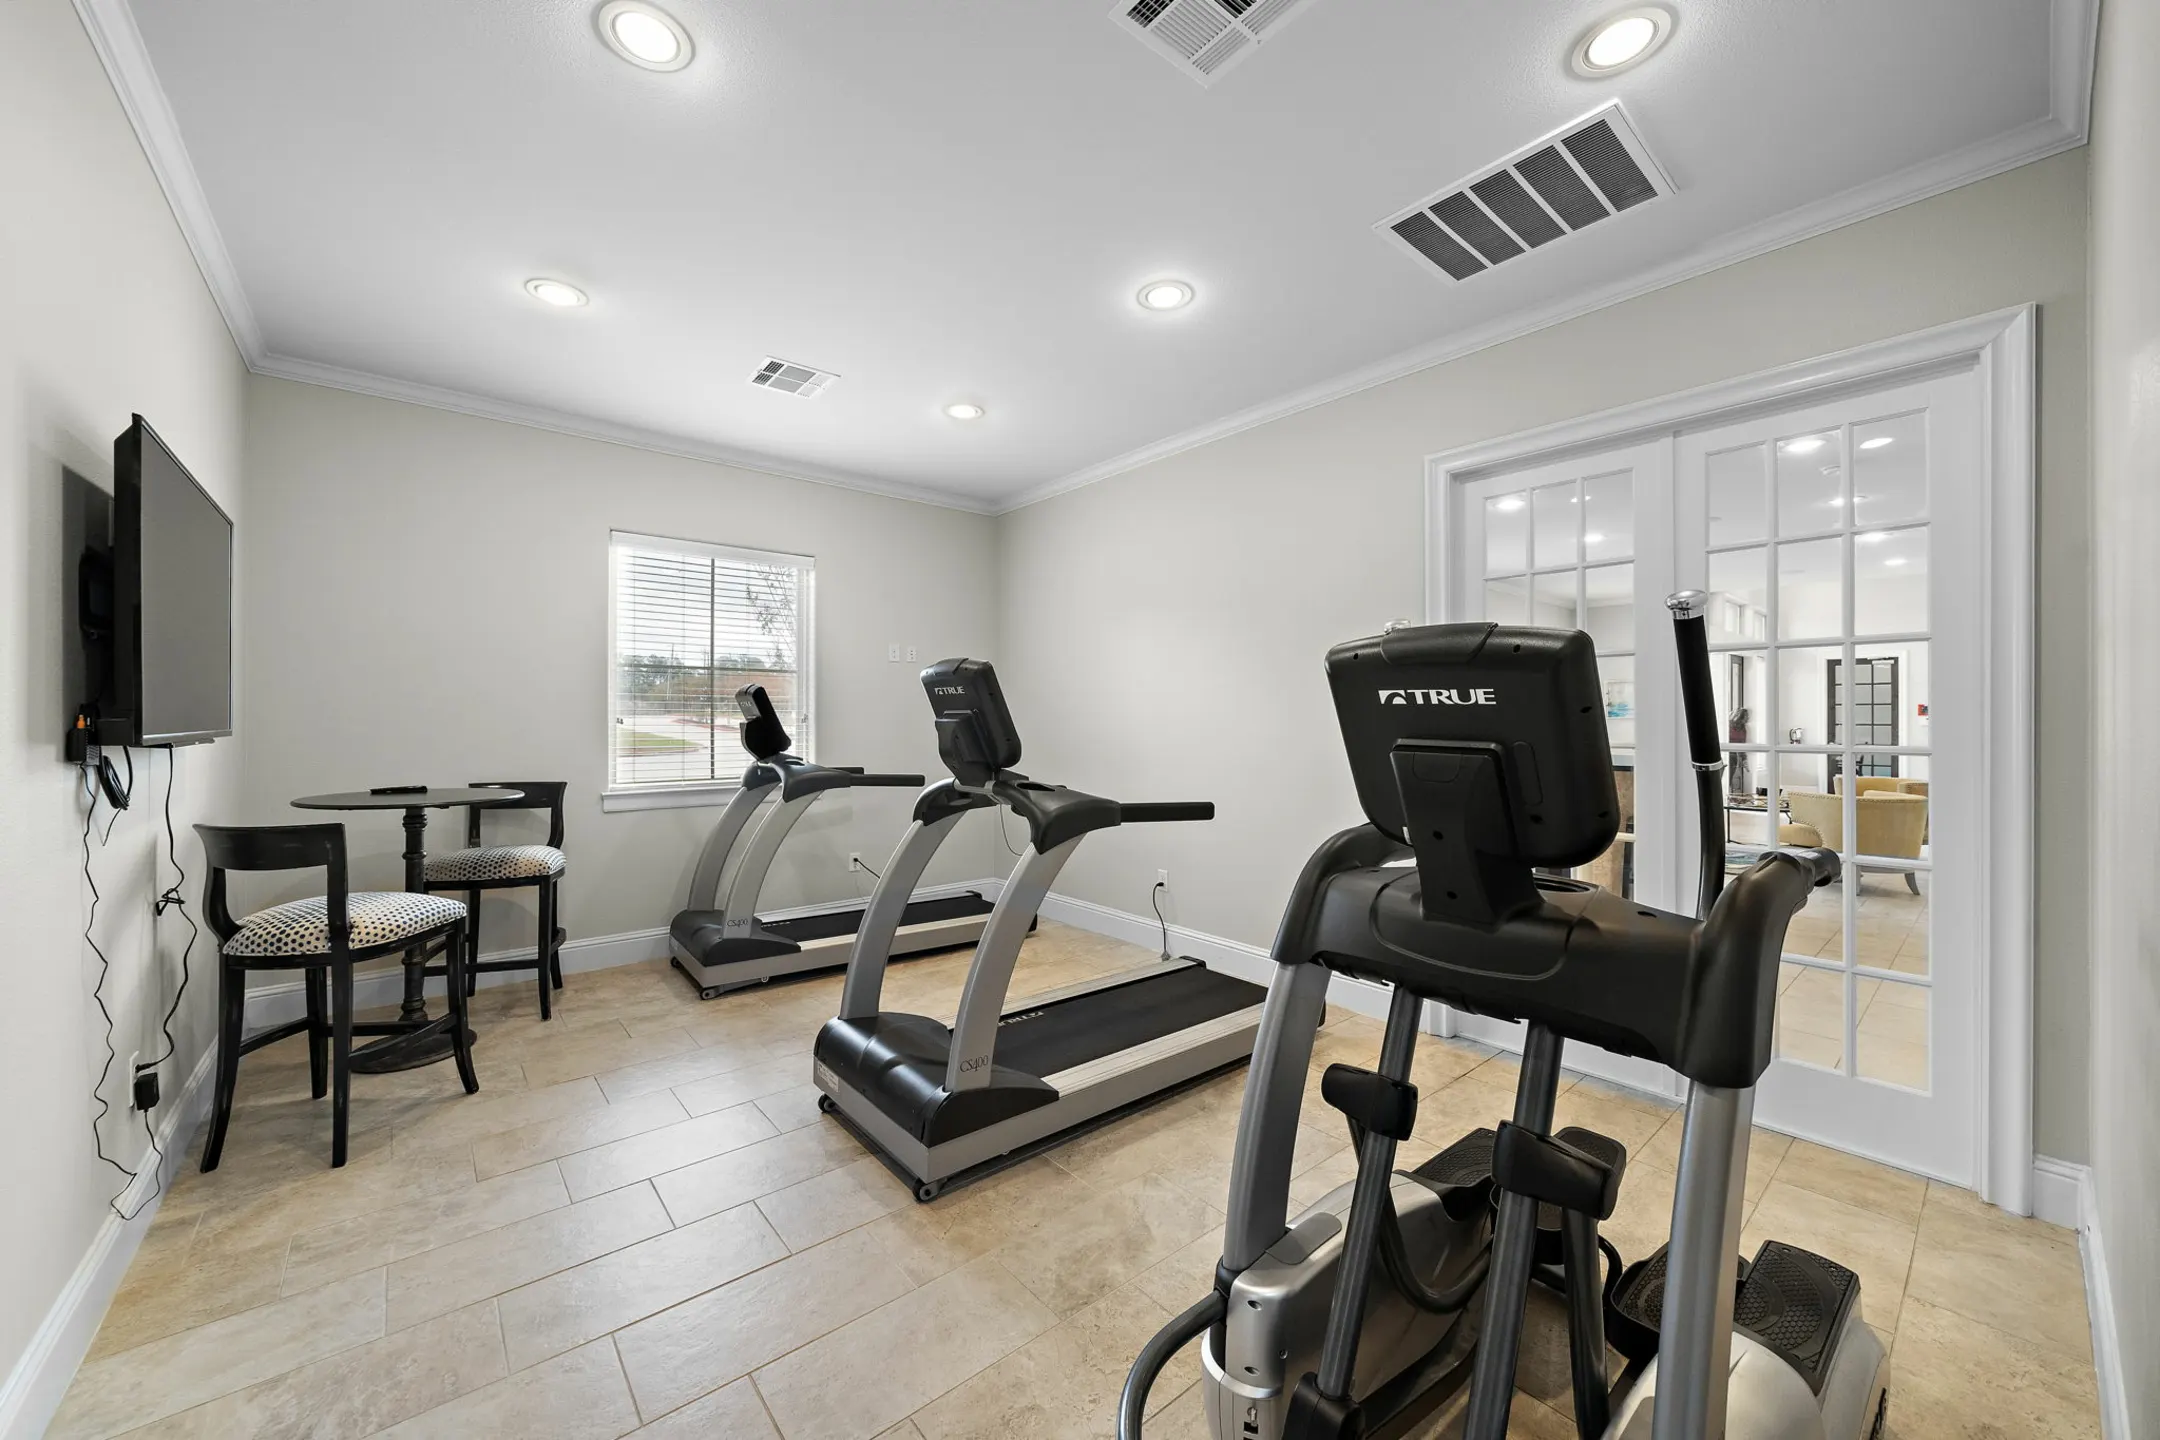 Fitness Weight Room - Harbor Shores - Conroe, TX